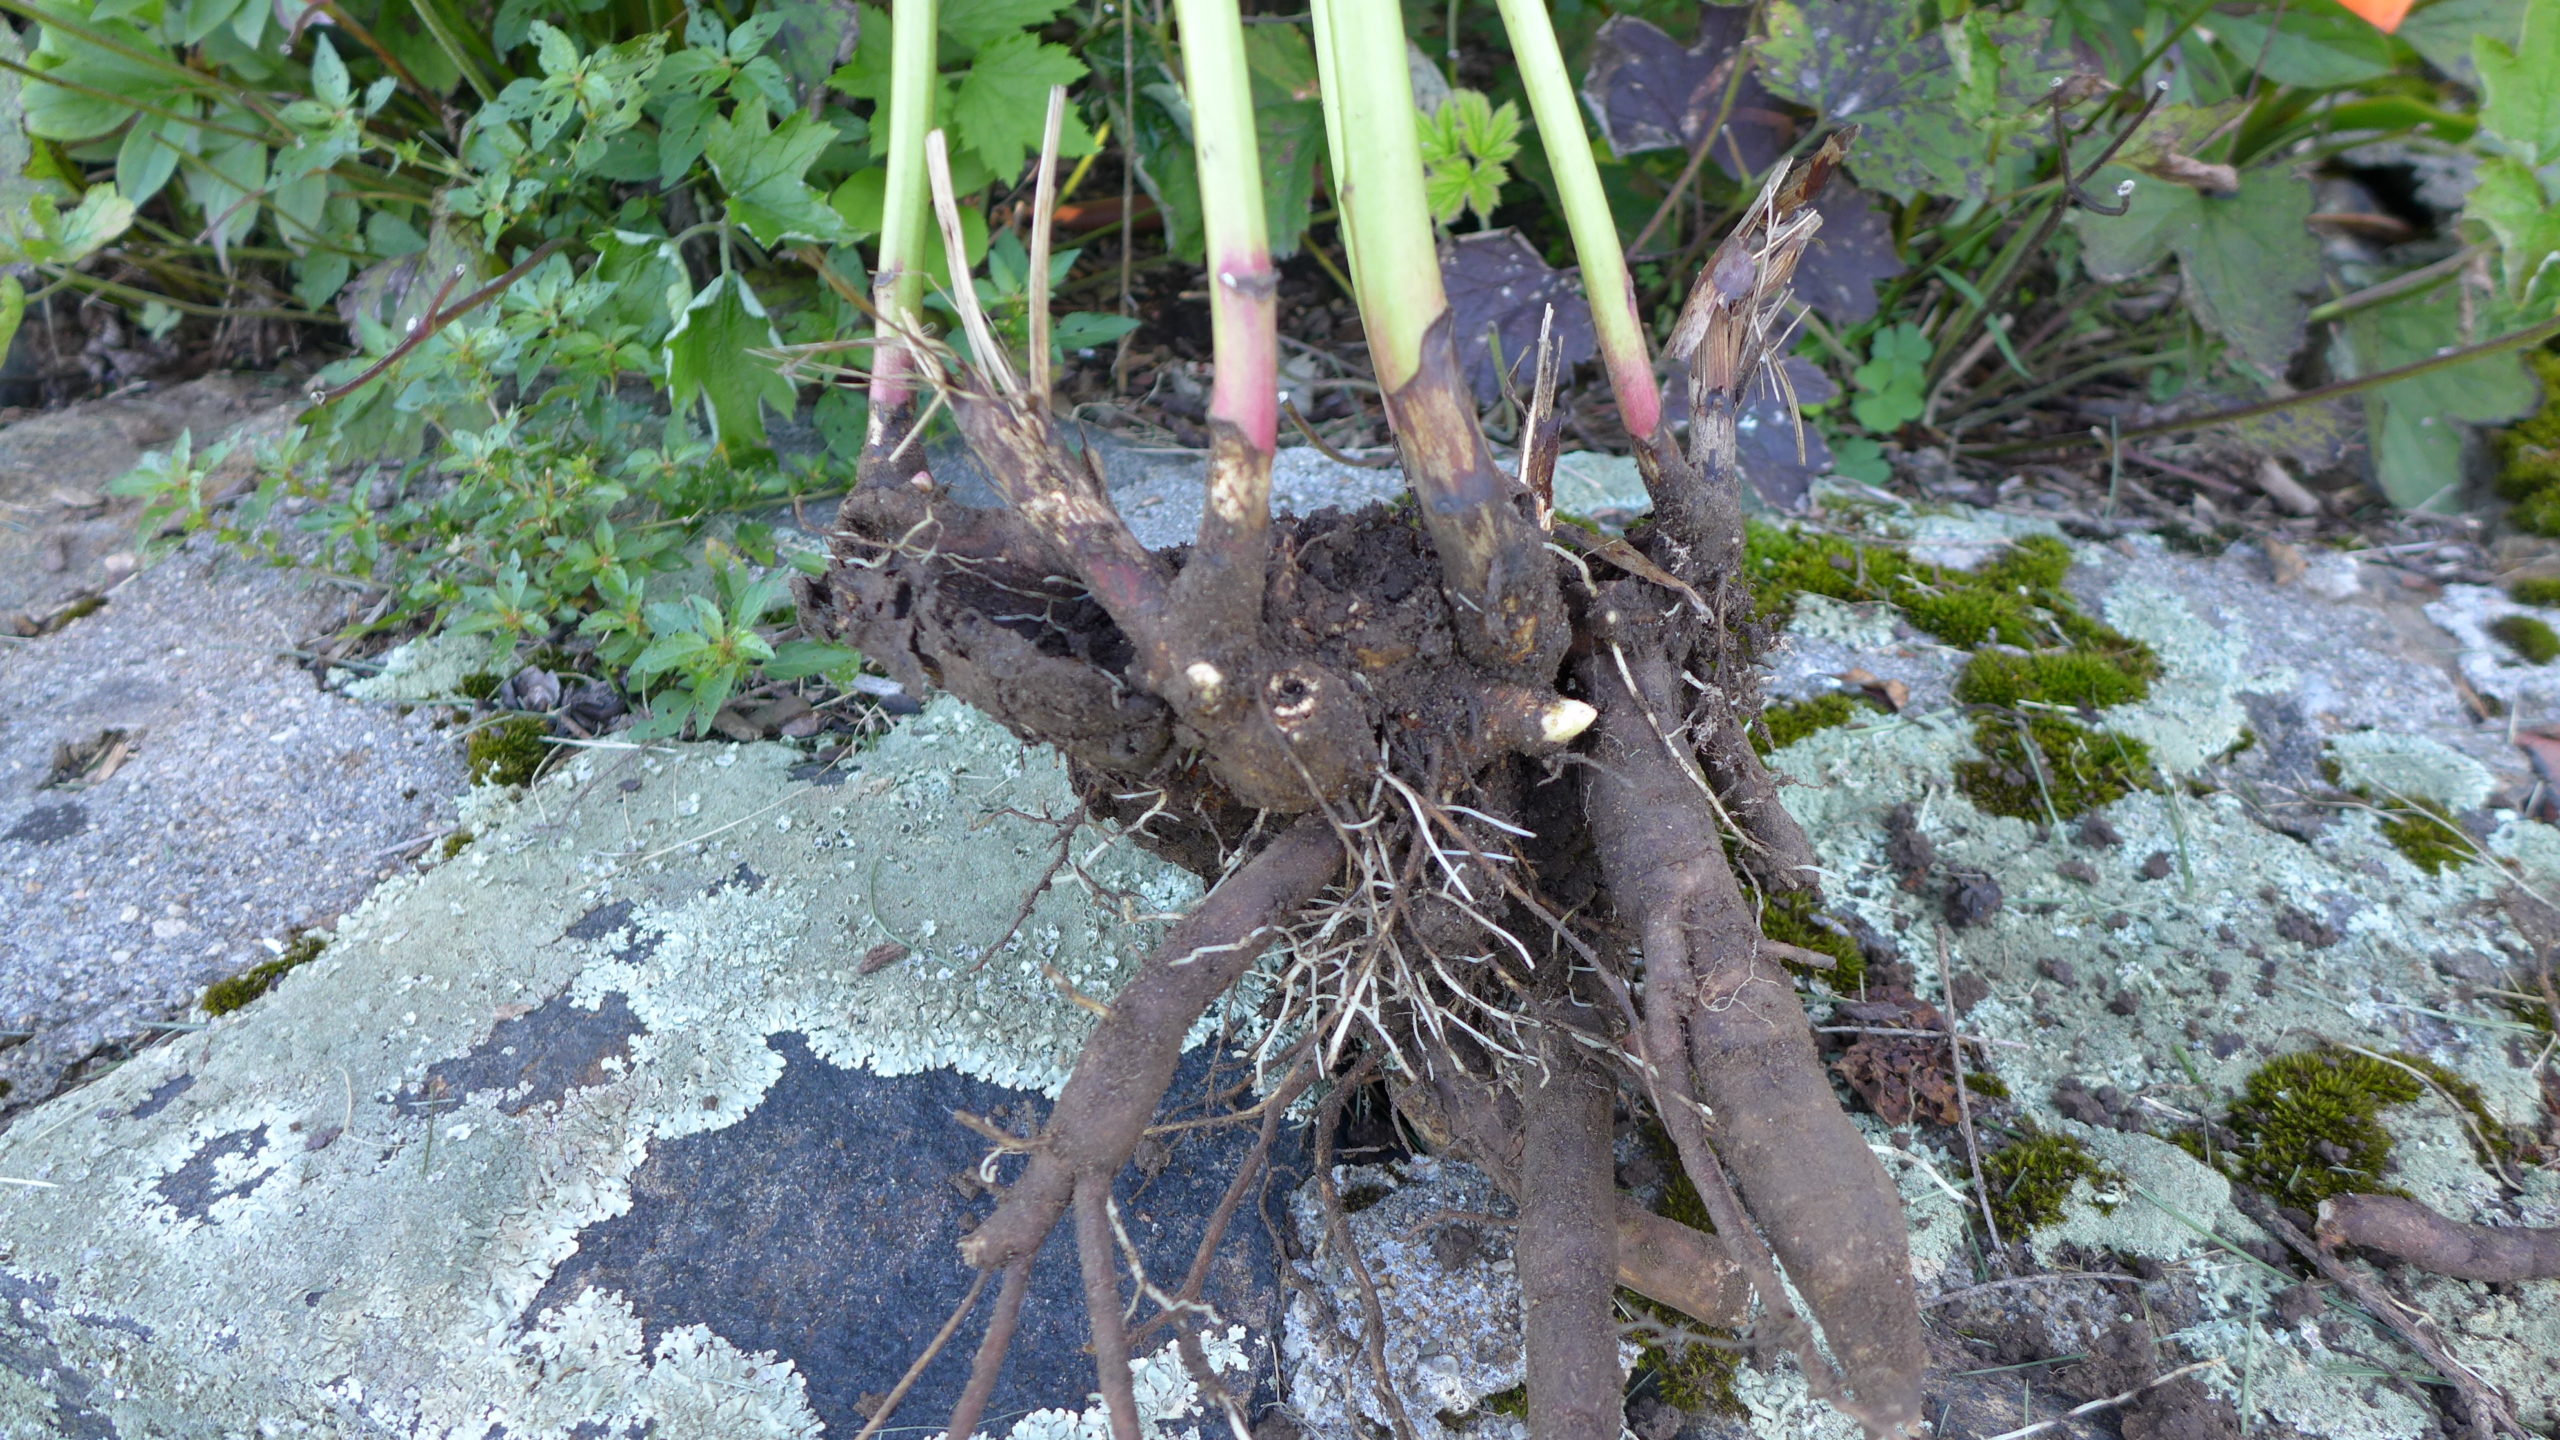 Dahlia roots/tubers should be dug, allowed to air dry, then stored in a dark cool (not freezing) spot packed in peat moss. Each section should have several eyes (light protrusions emerging from the tubers). Don’t wash prior to storing. Cut the stems to 1 to 2 inches when storing.